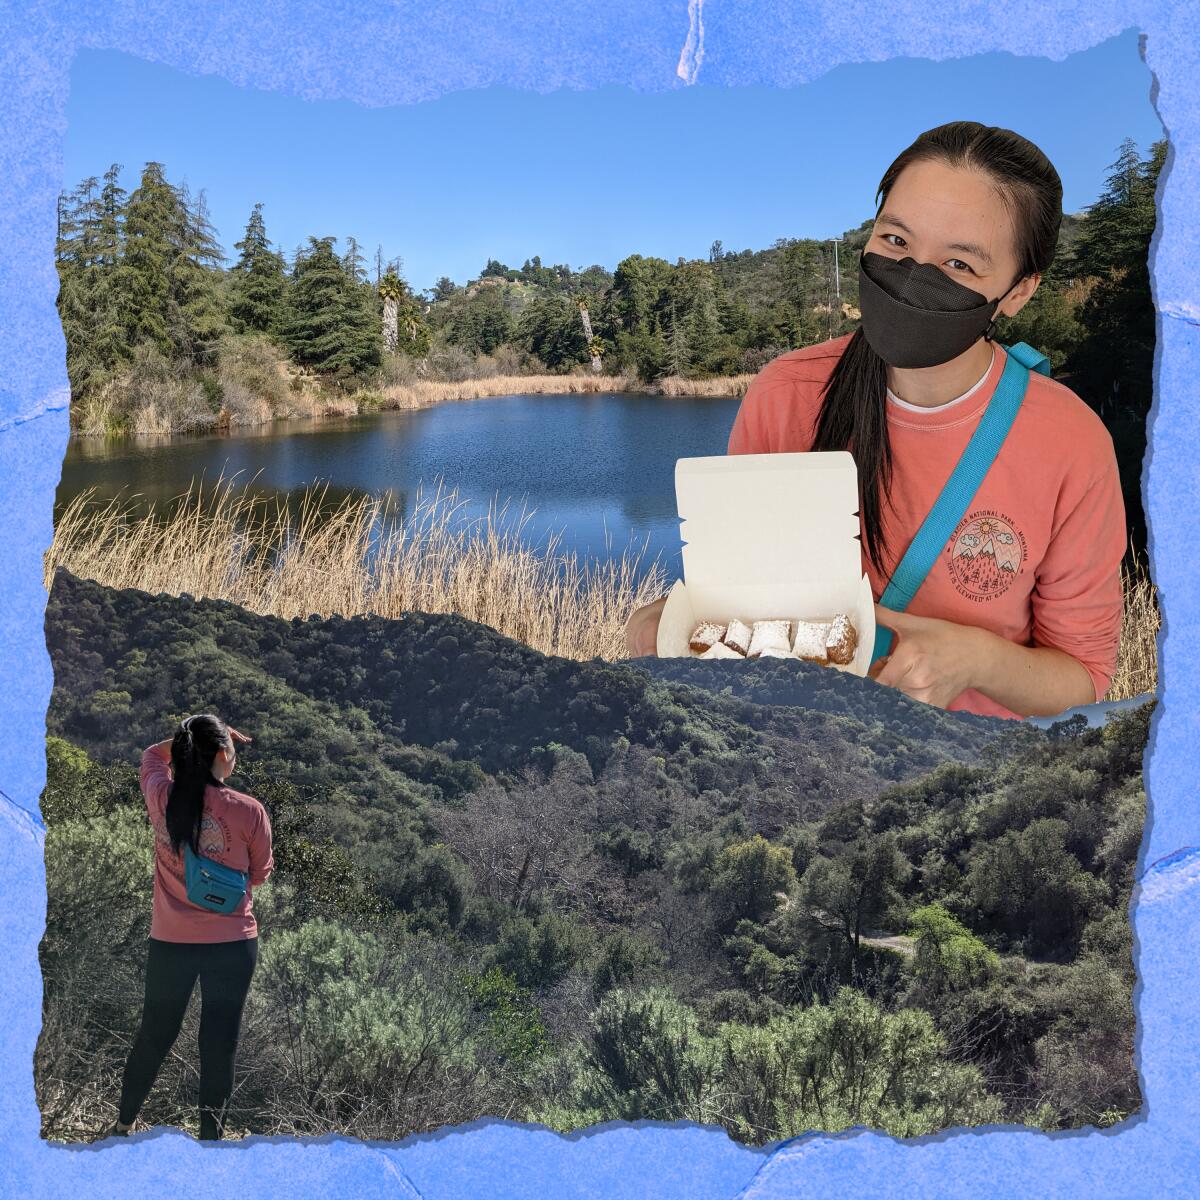 Two photos of a young woman in a ponytail and mask outdoors near a lake.